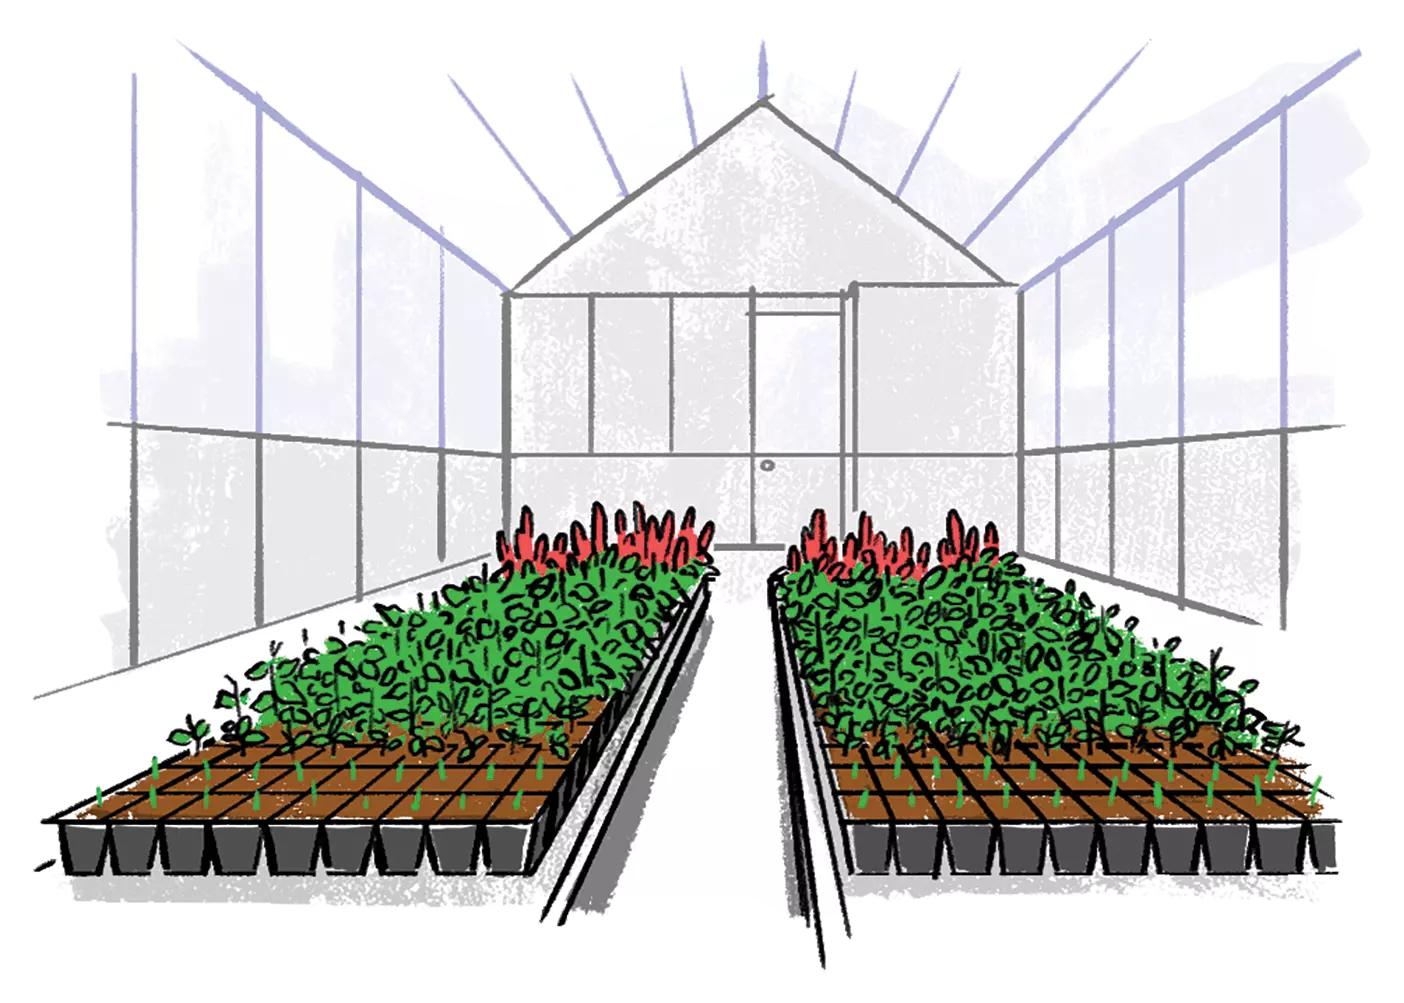 An illustration of quinoa growing in a greenhouse.